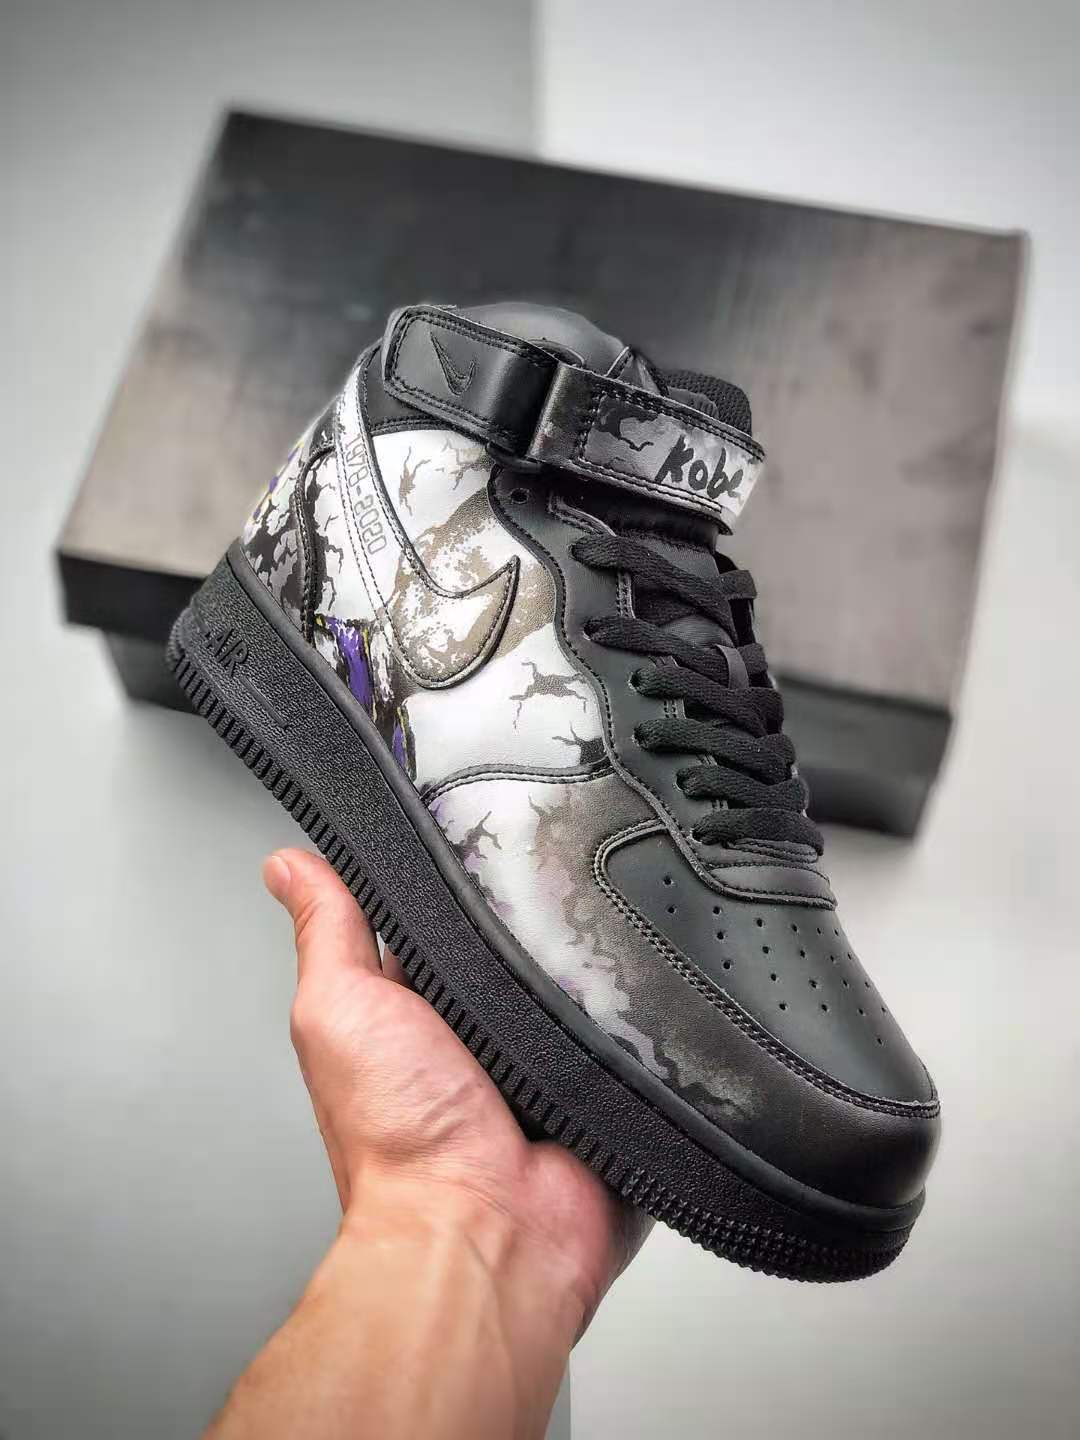 Nike Air Force 1 High 'Kobe' AQ8021-002 - Legendary Basketball Sneakers for Superior Performance